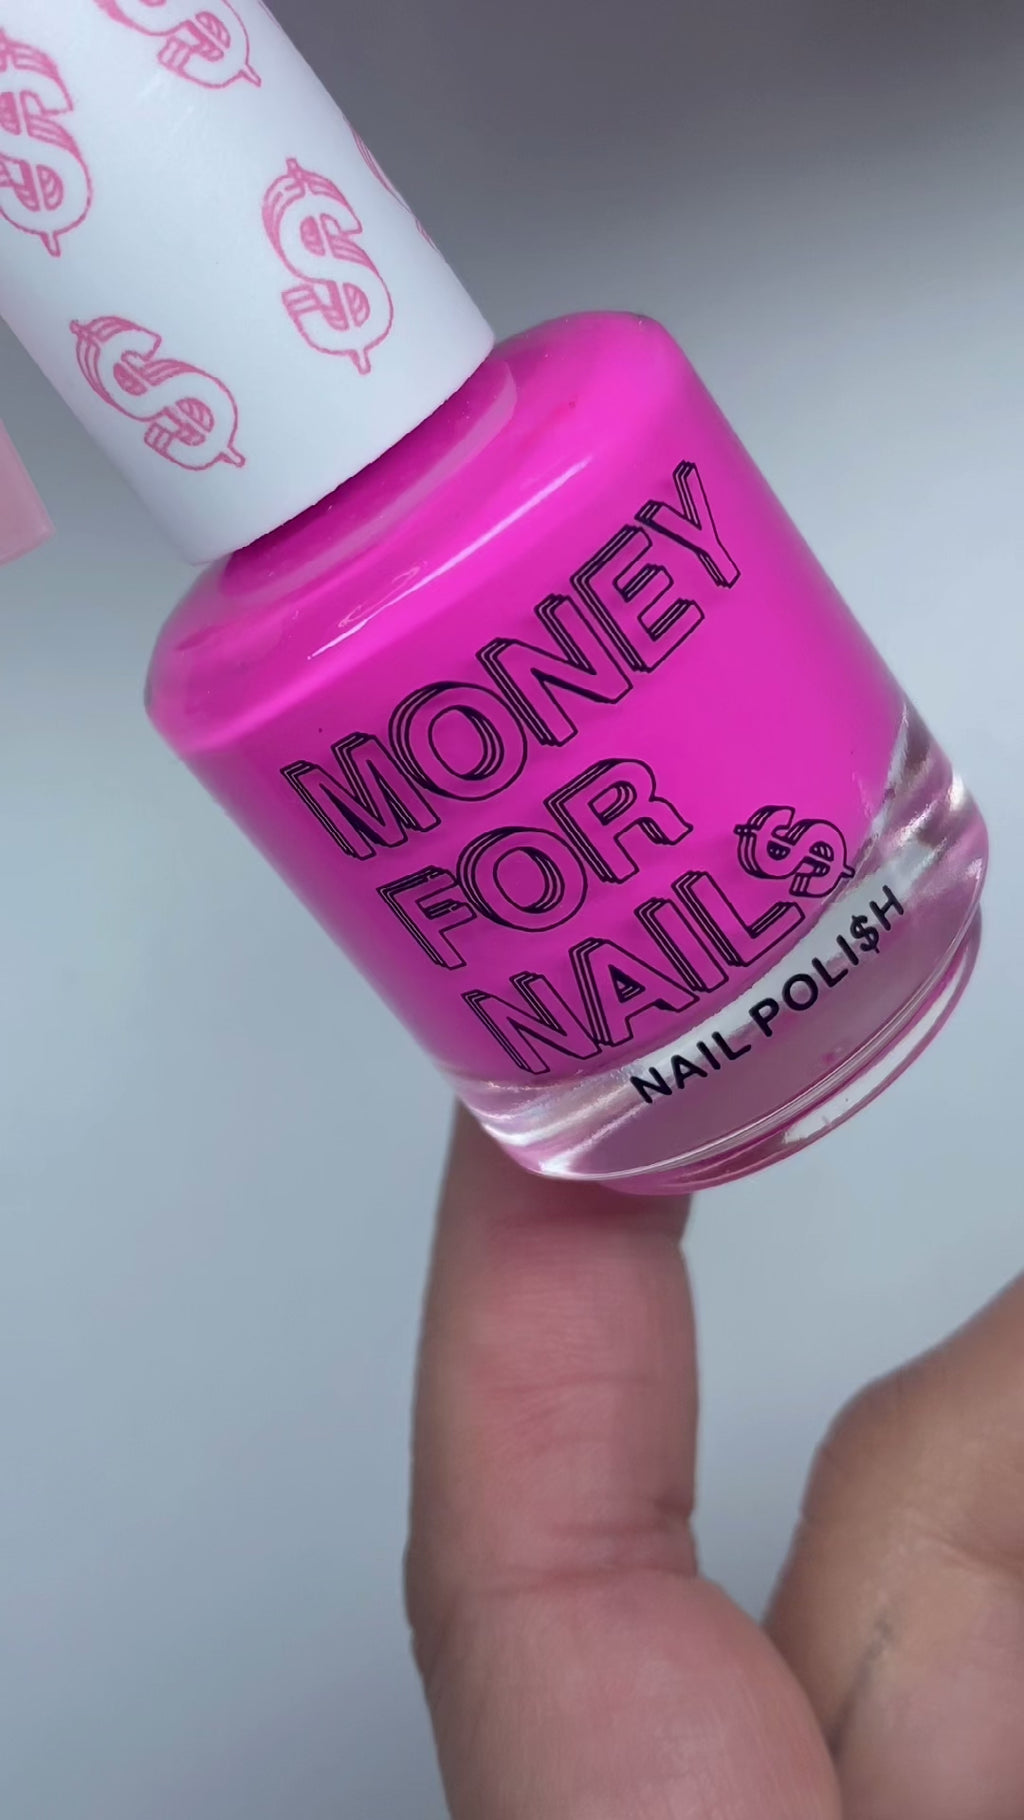 65 Nails Hot Pink Instagram Posts, Nails Quotes, Social Media Posts,  Instagram Nails Templates, Nail Tech Quotes, Nail Salon Posts - Etsy  Singapore